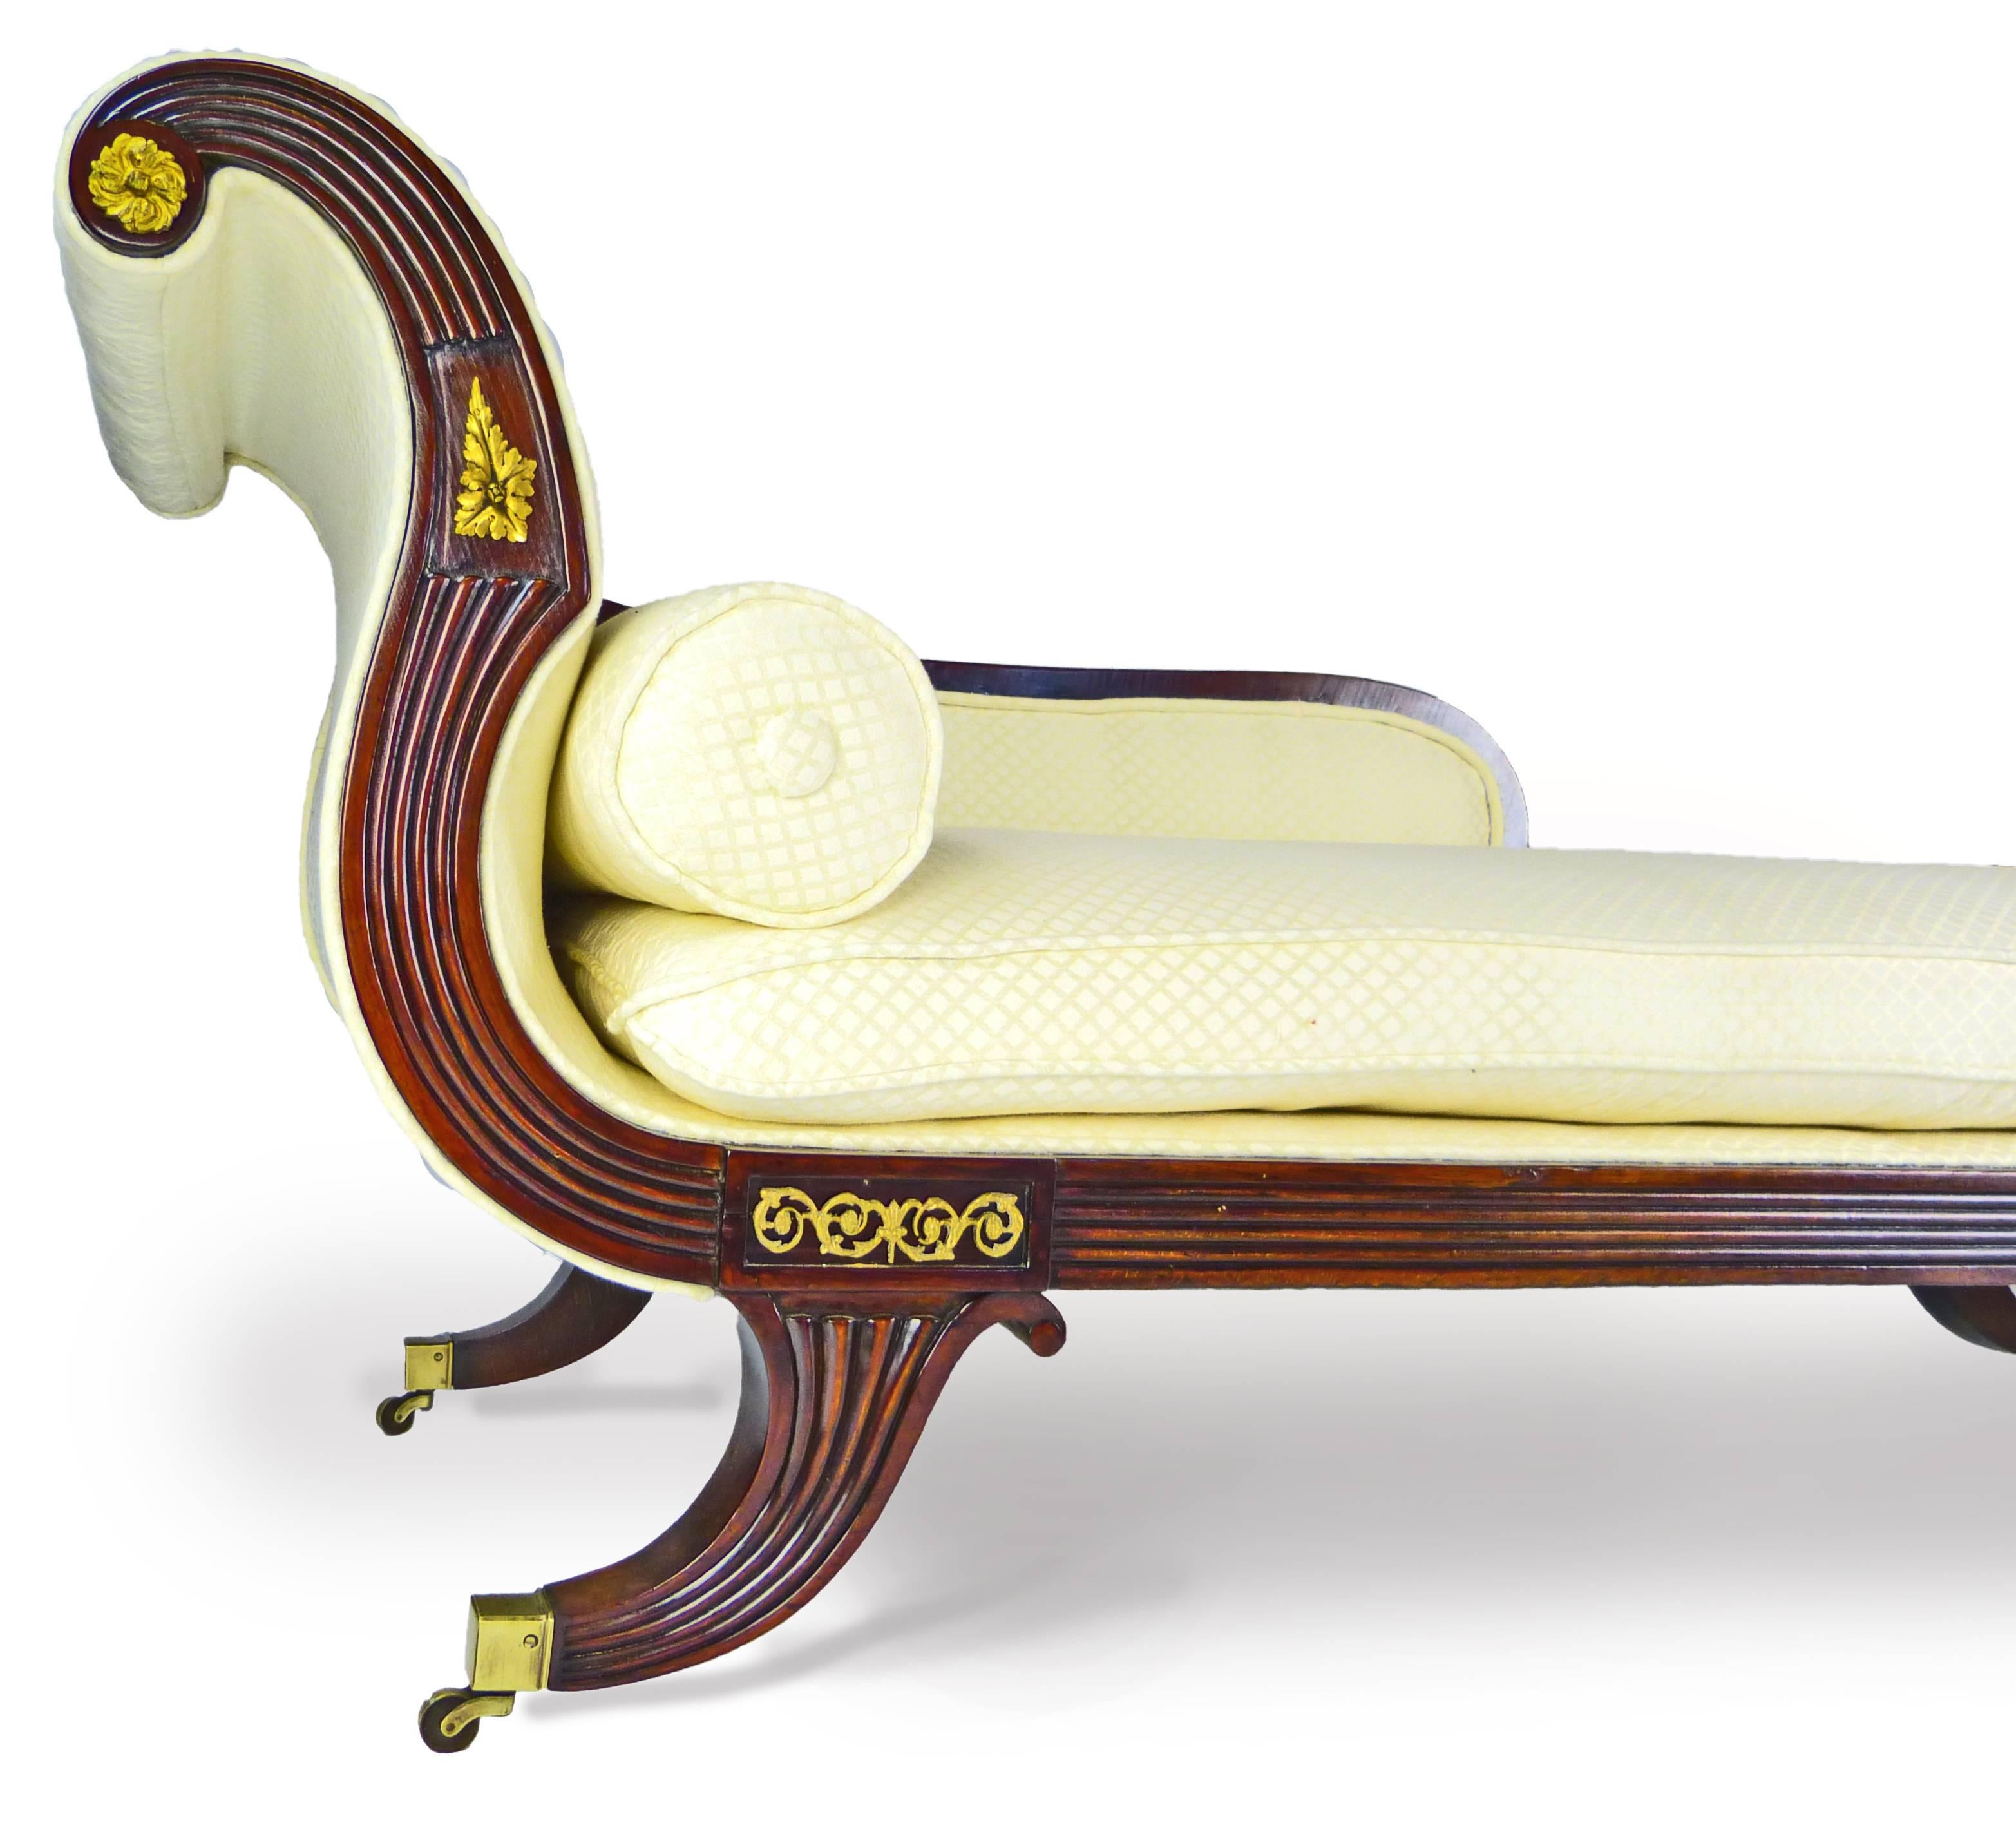 Fine chaise longue or daybed of North American origin and in the Federal style equivalent to the Regency style in England. The chaise longue has four fronts and made to be used in the center of a room. A quite similar chaise longue of this quality